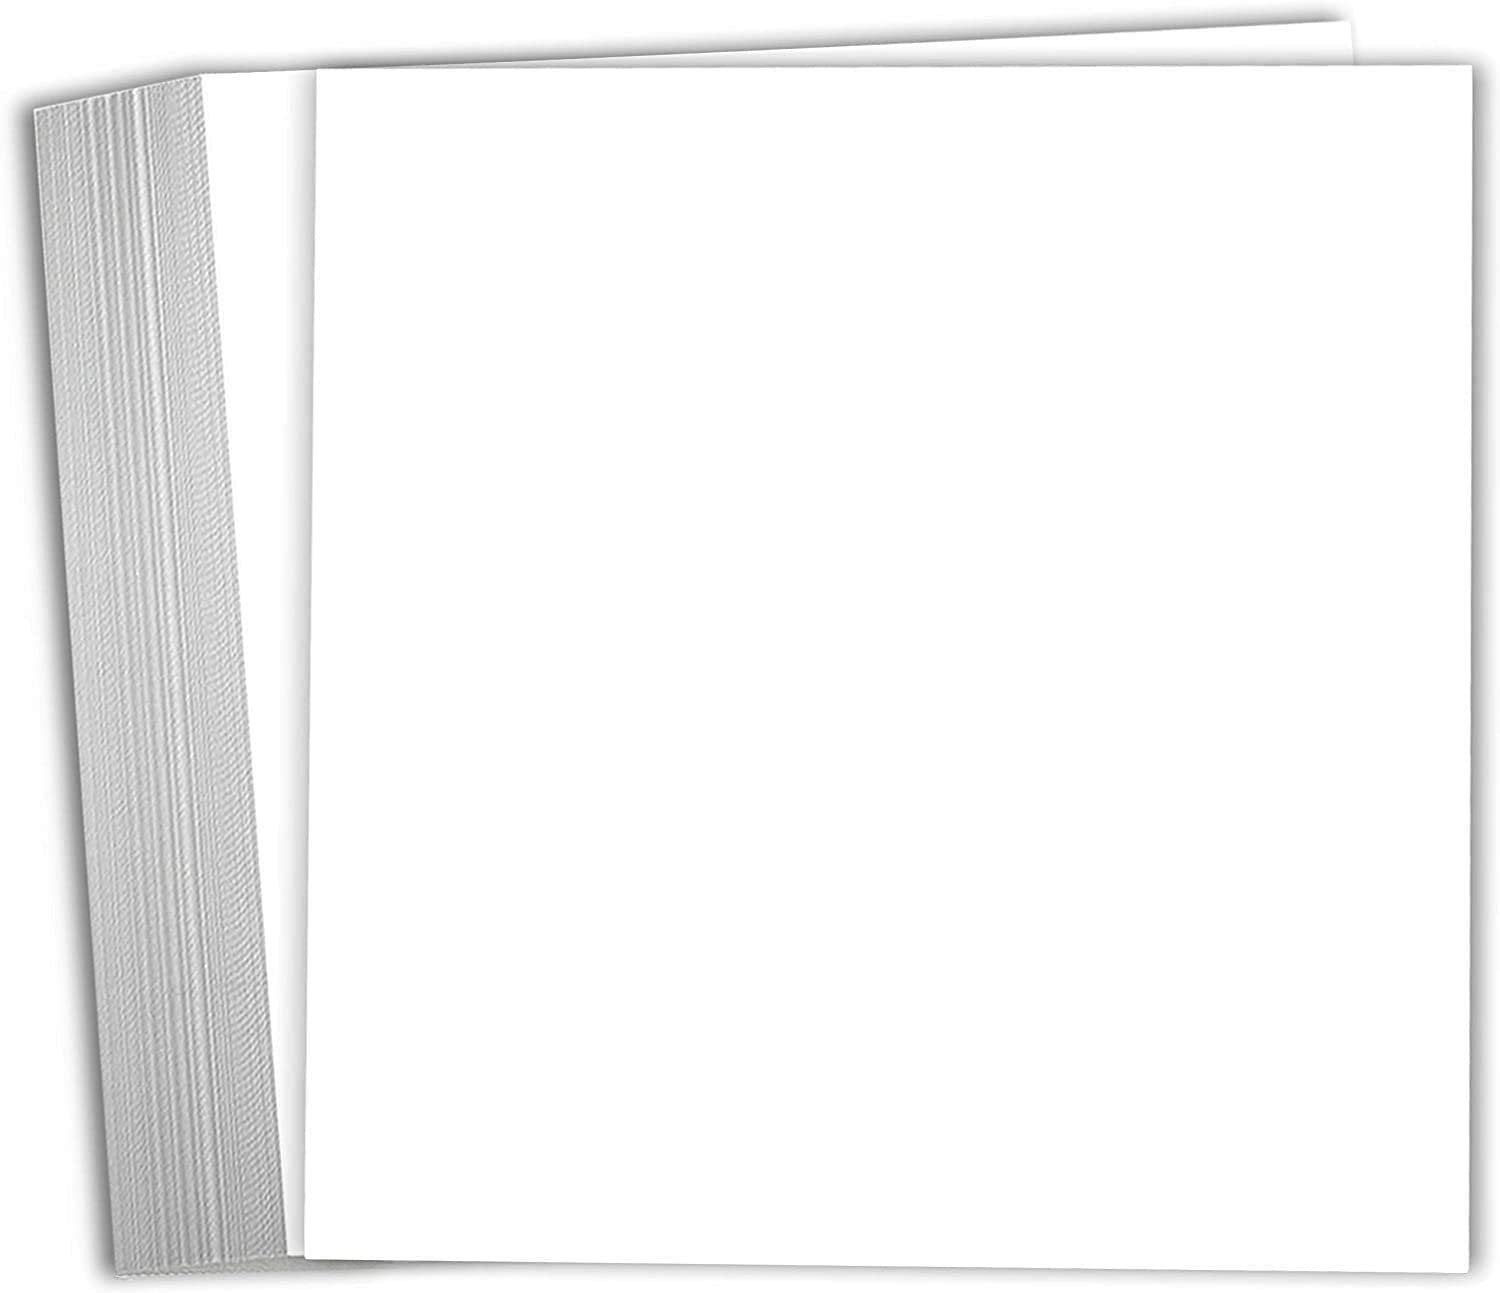 PA Paper Accents Smooth Cardstock 8.5 x 11 Matte White, 80lb colored cardstock  paper for card making, scrapbooking, printing, quilling and crafts, 25  piece pack